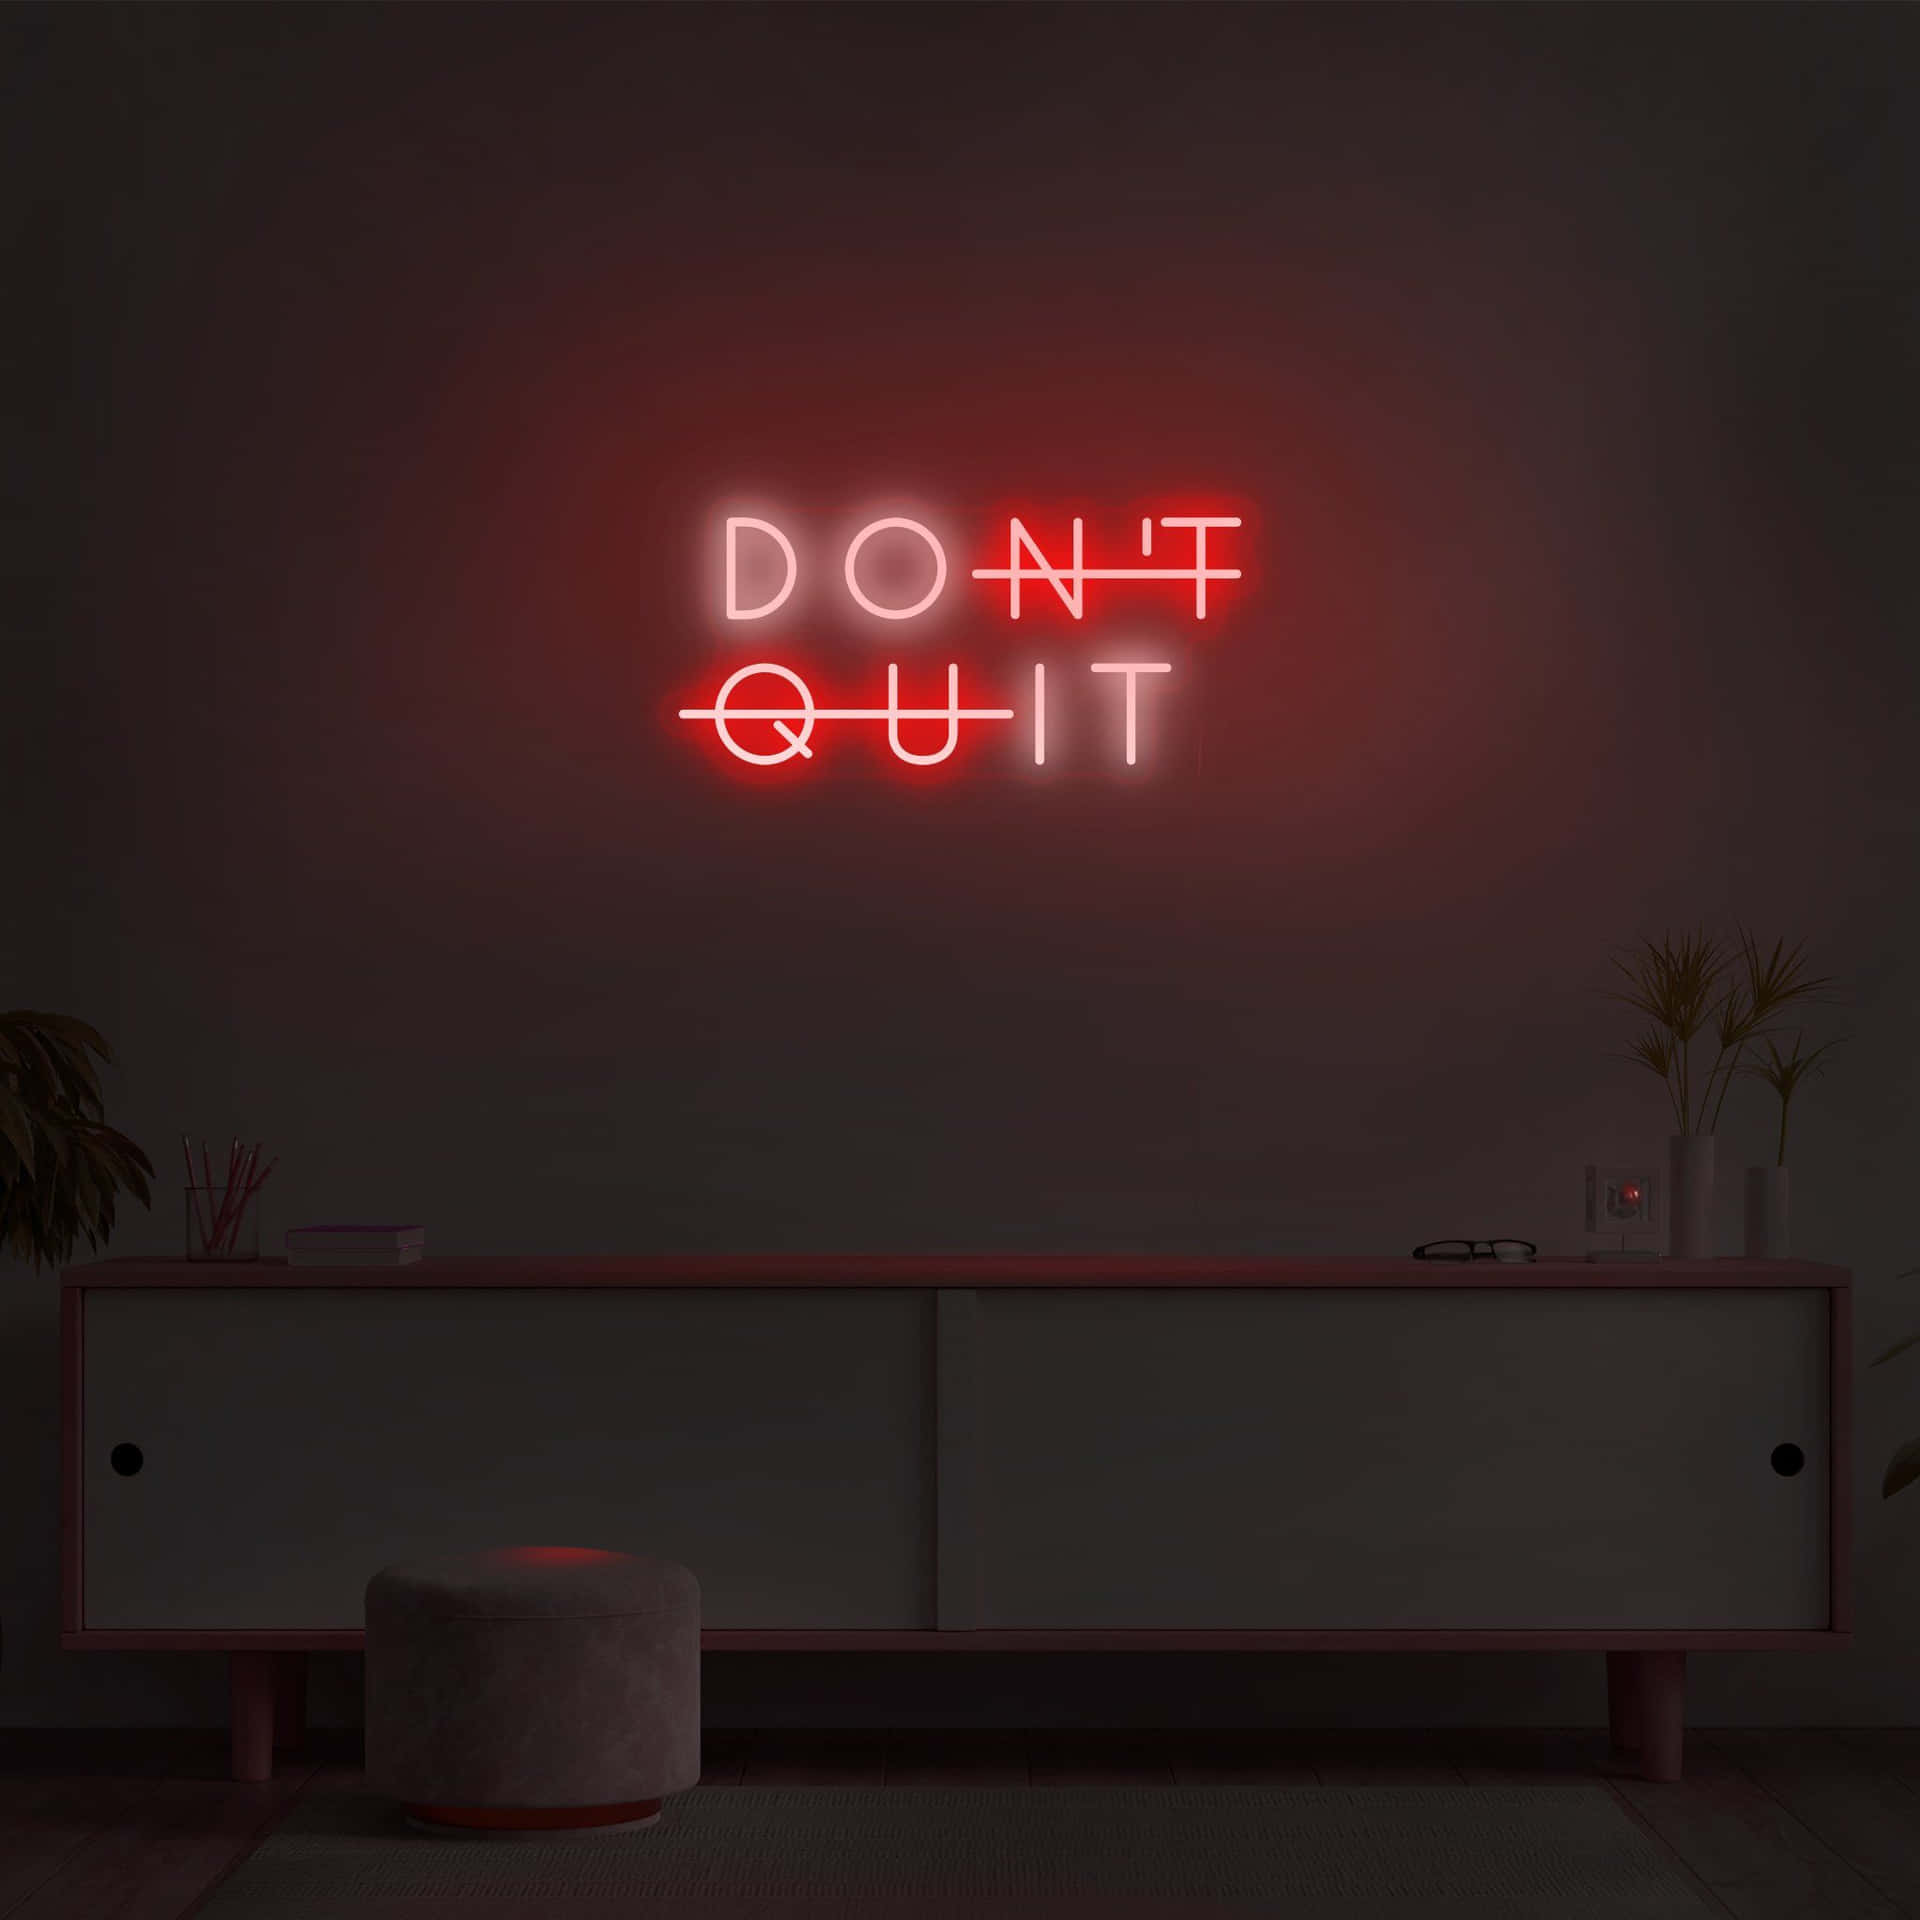 WALLPAPER PHONE | Neon signs, Neon quotes, Neon signs quotes